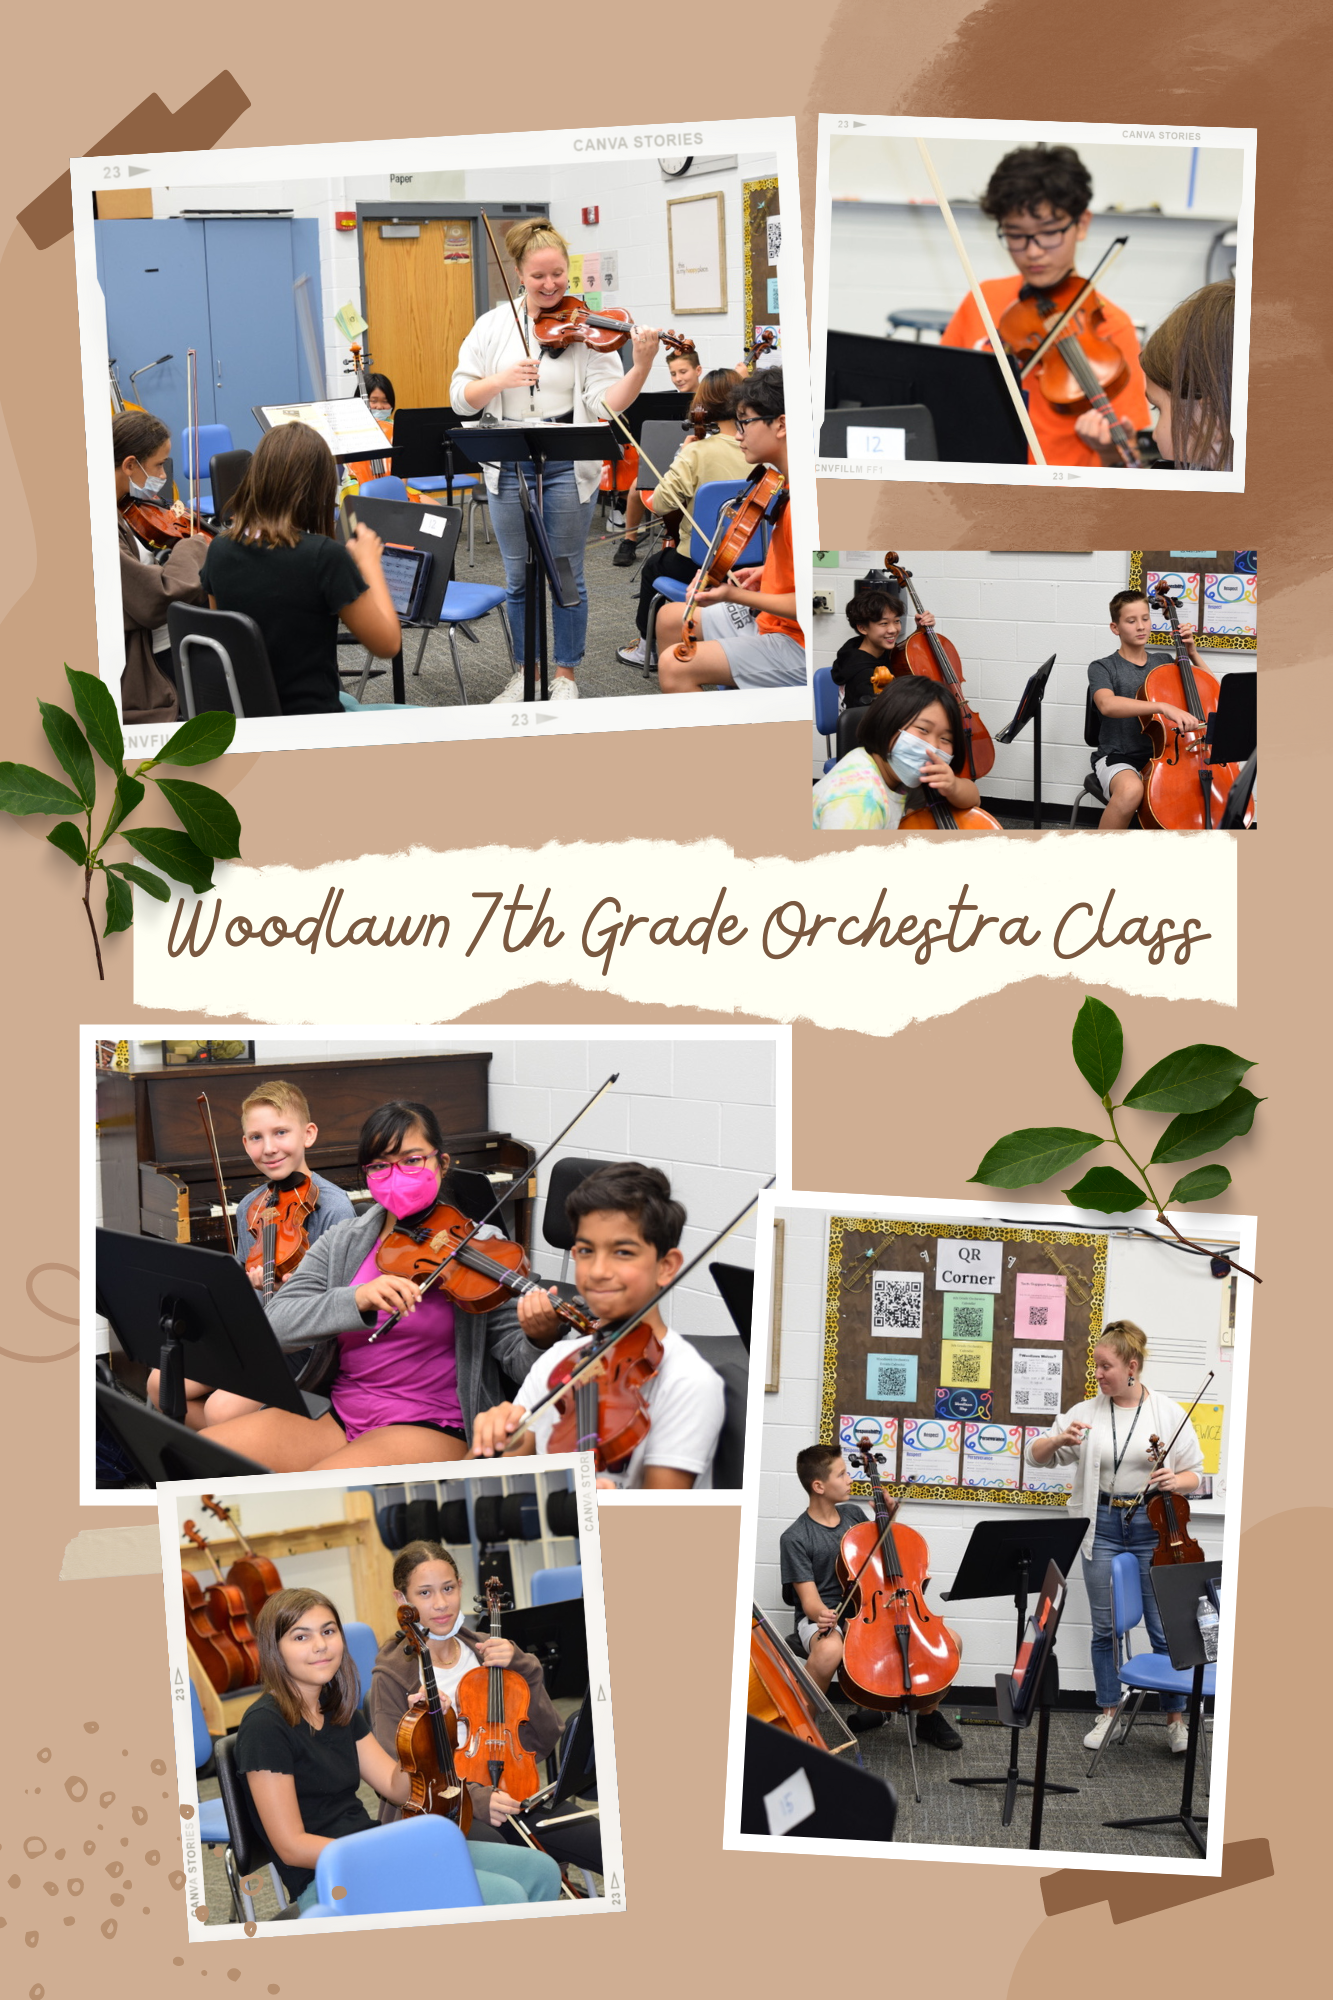 Woodlawn 7th Grade Orchestra Class